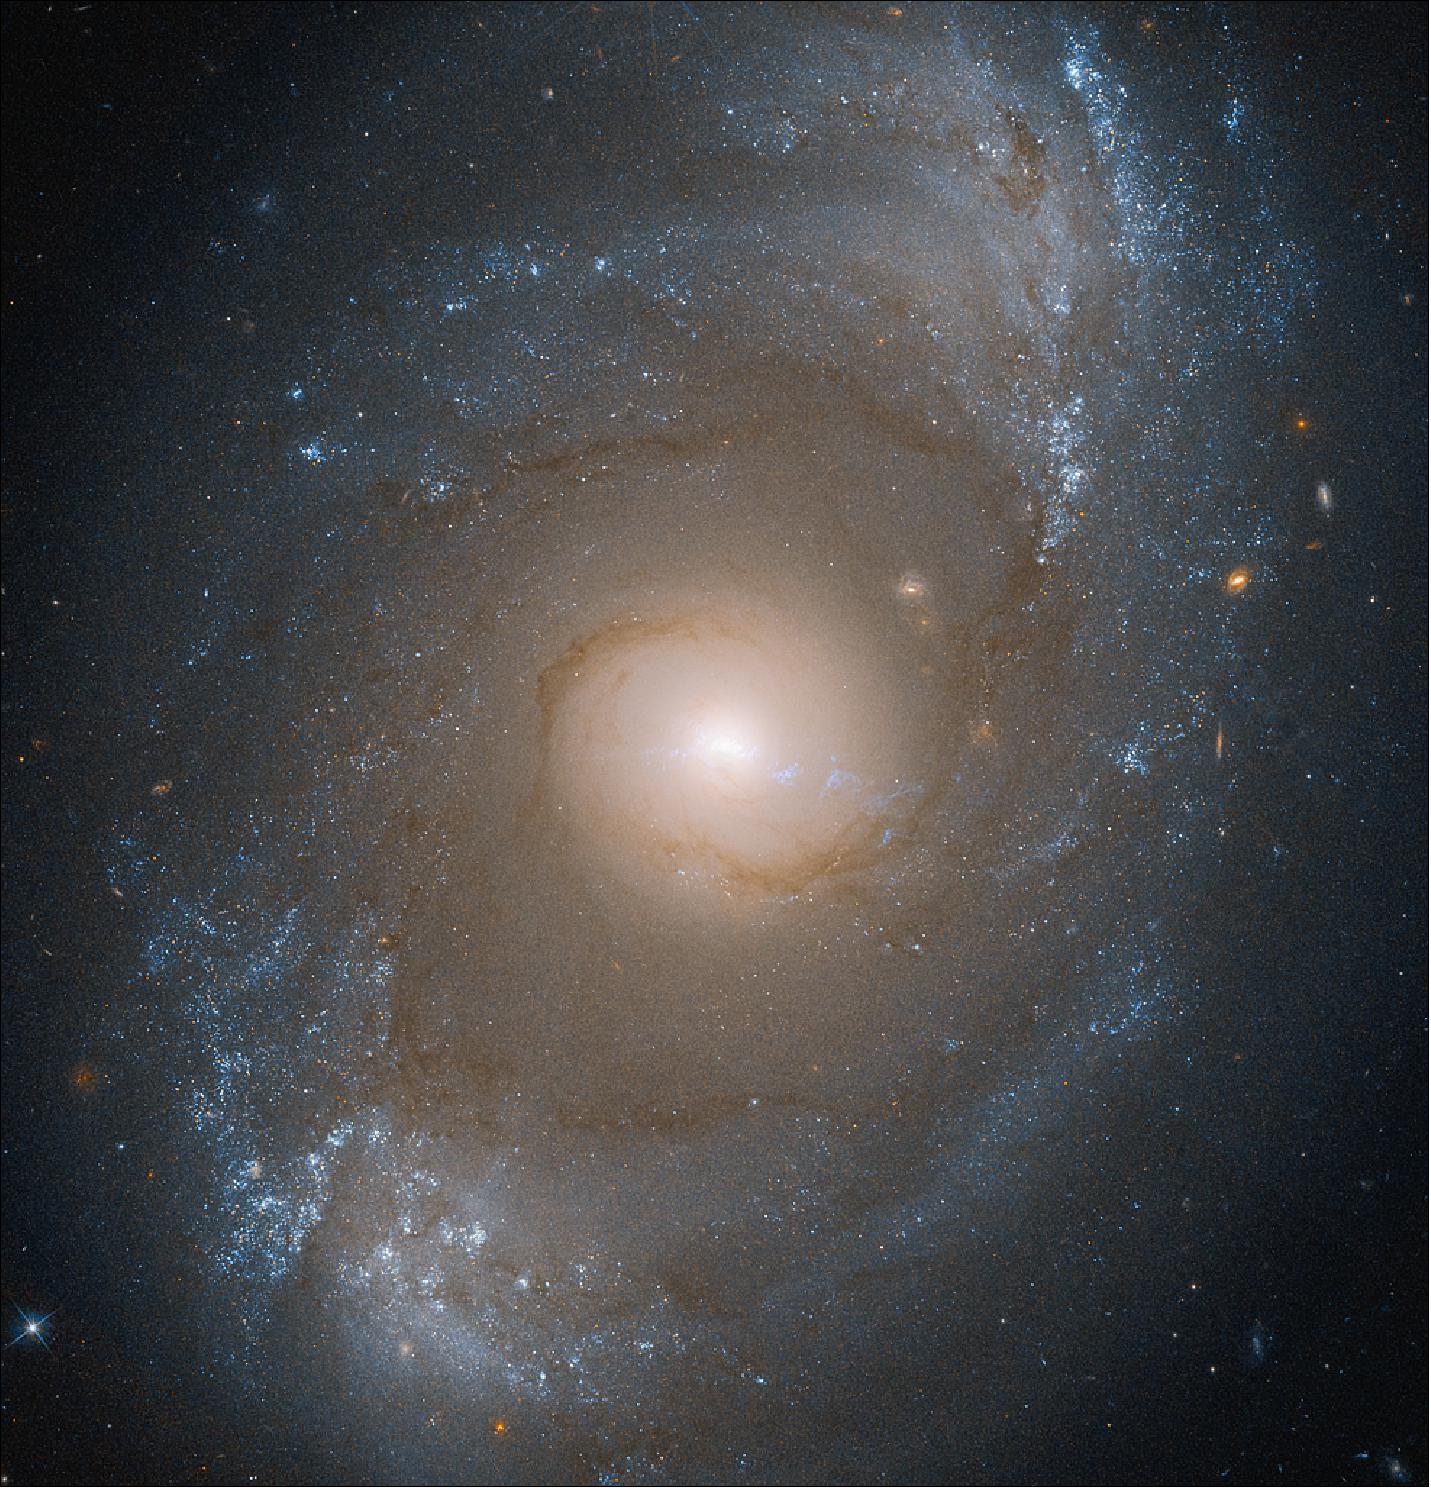 Figure 29: The spiral galaxy NGC 4151 has a bright, active core powered by a supermassive black hole. Webb will weigh the black hole by measuring the motions of stars at the galaxy’s center [image credits: NASA, ESA, and J. DePasquale (STScI)]